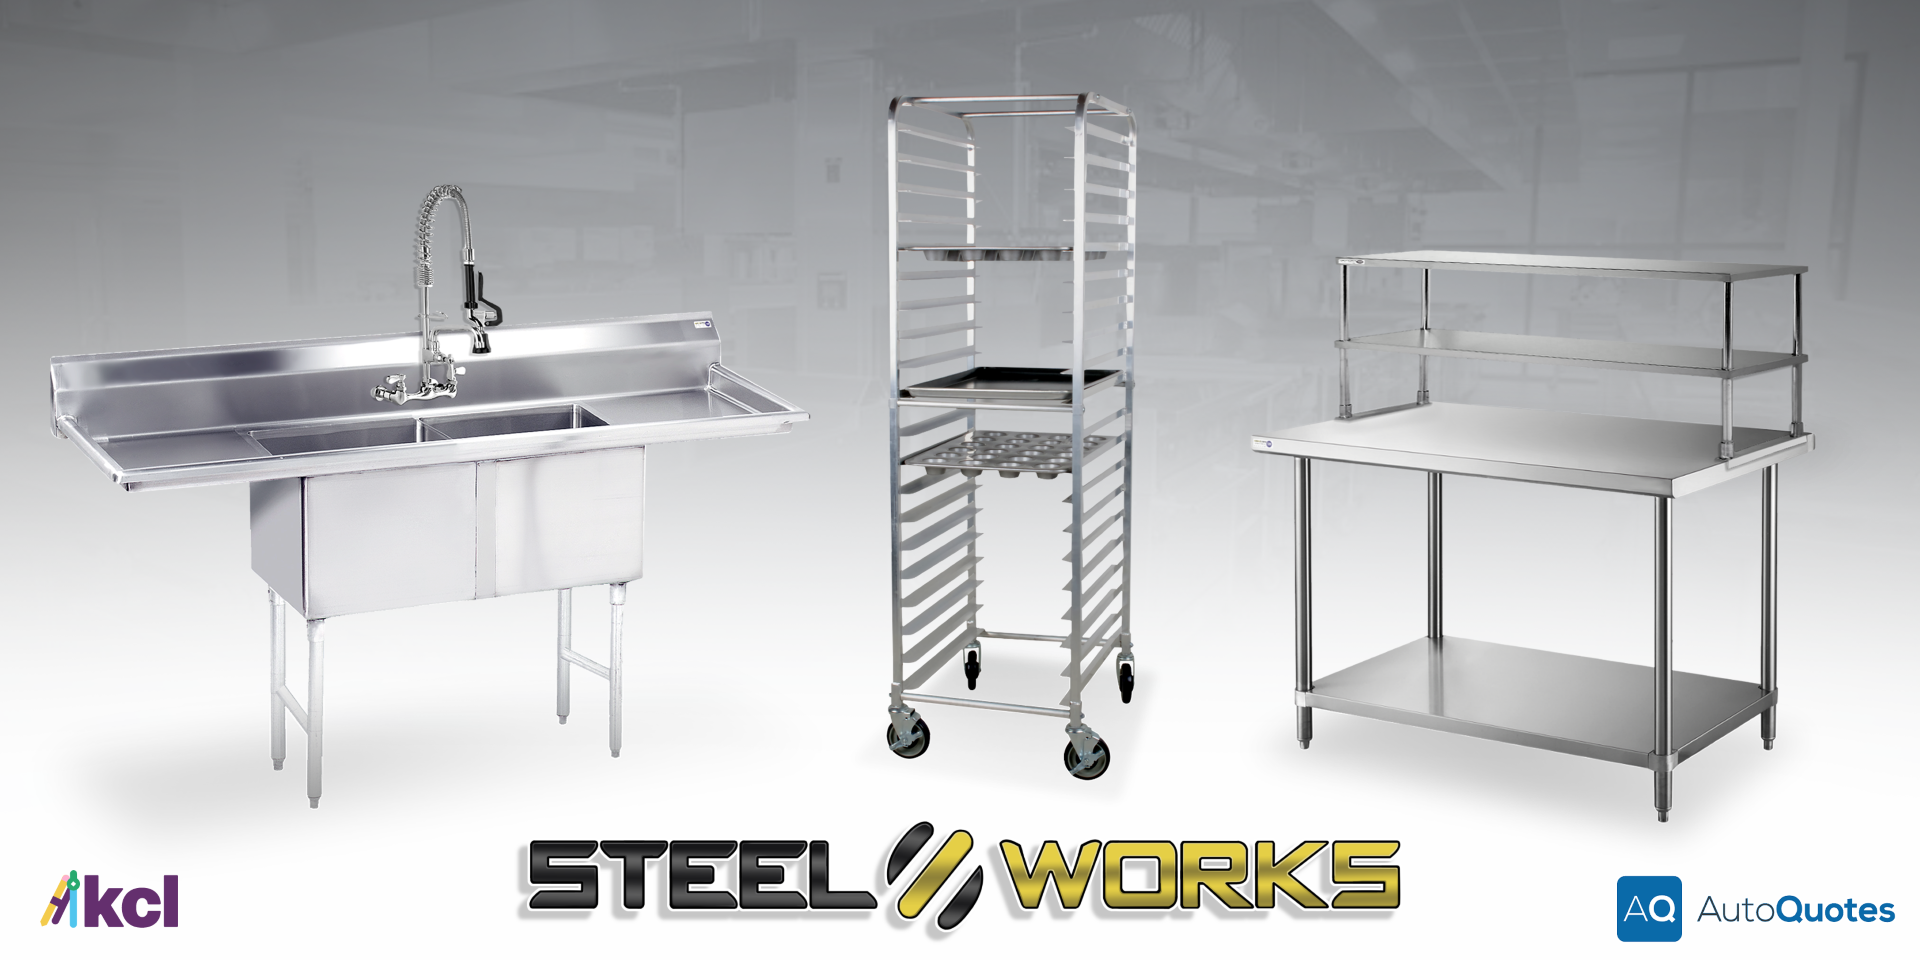 Steelworks products now on KCL foodservice design software.